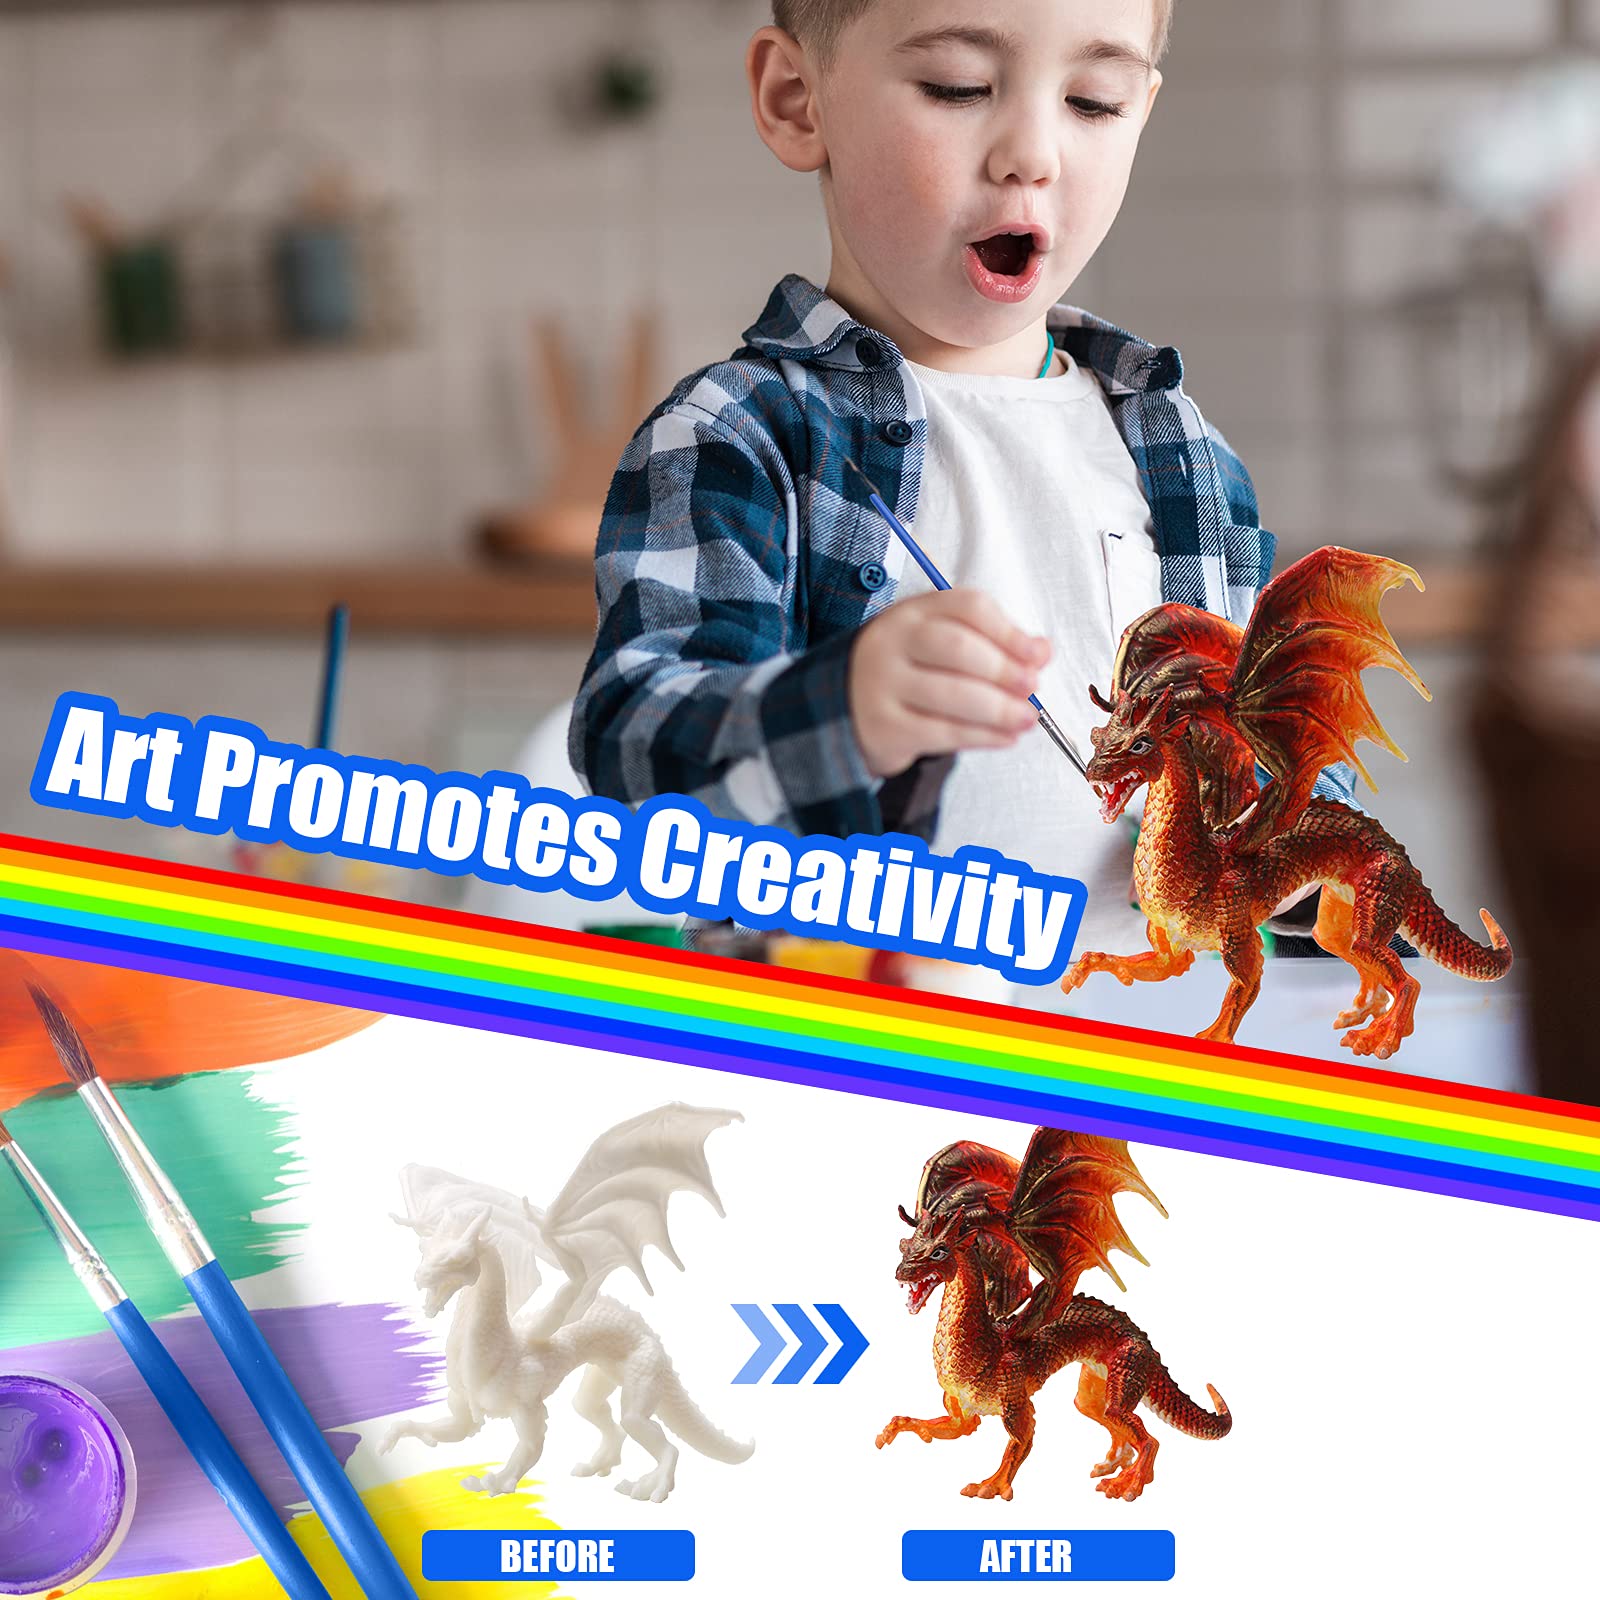 SOLDAY Painting Dragon Toys Kits for Kids Arts and Crafts Ages 3 6 5 7 9 12 Boys Girls to Make Your Own Paintable Figurines Birthday Party Supplies - 2 Dragons